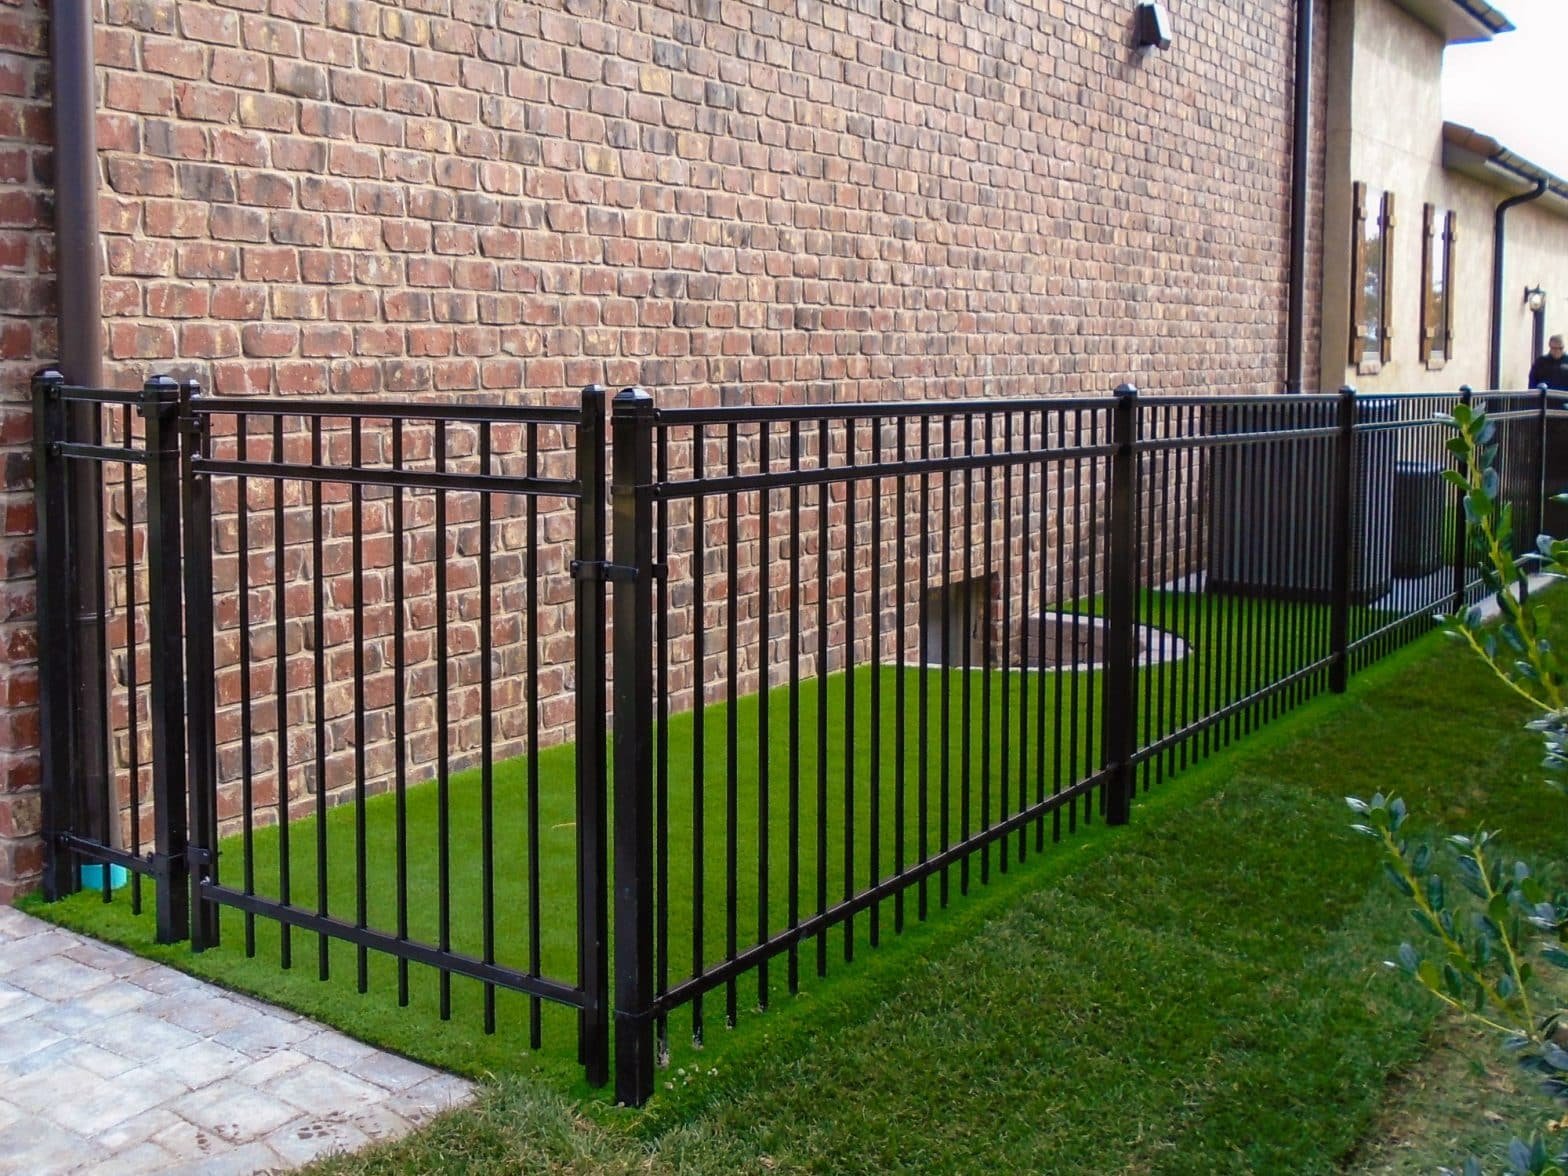 Exquisite ornamental iron fences in Springfield, blending style and security seamlessly